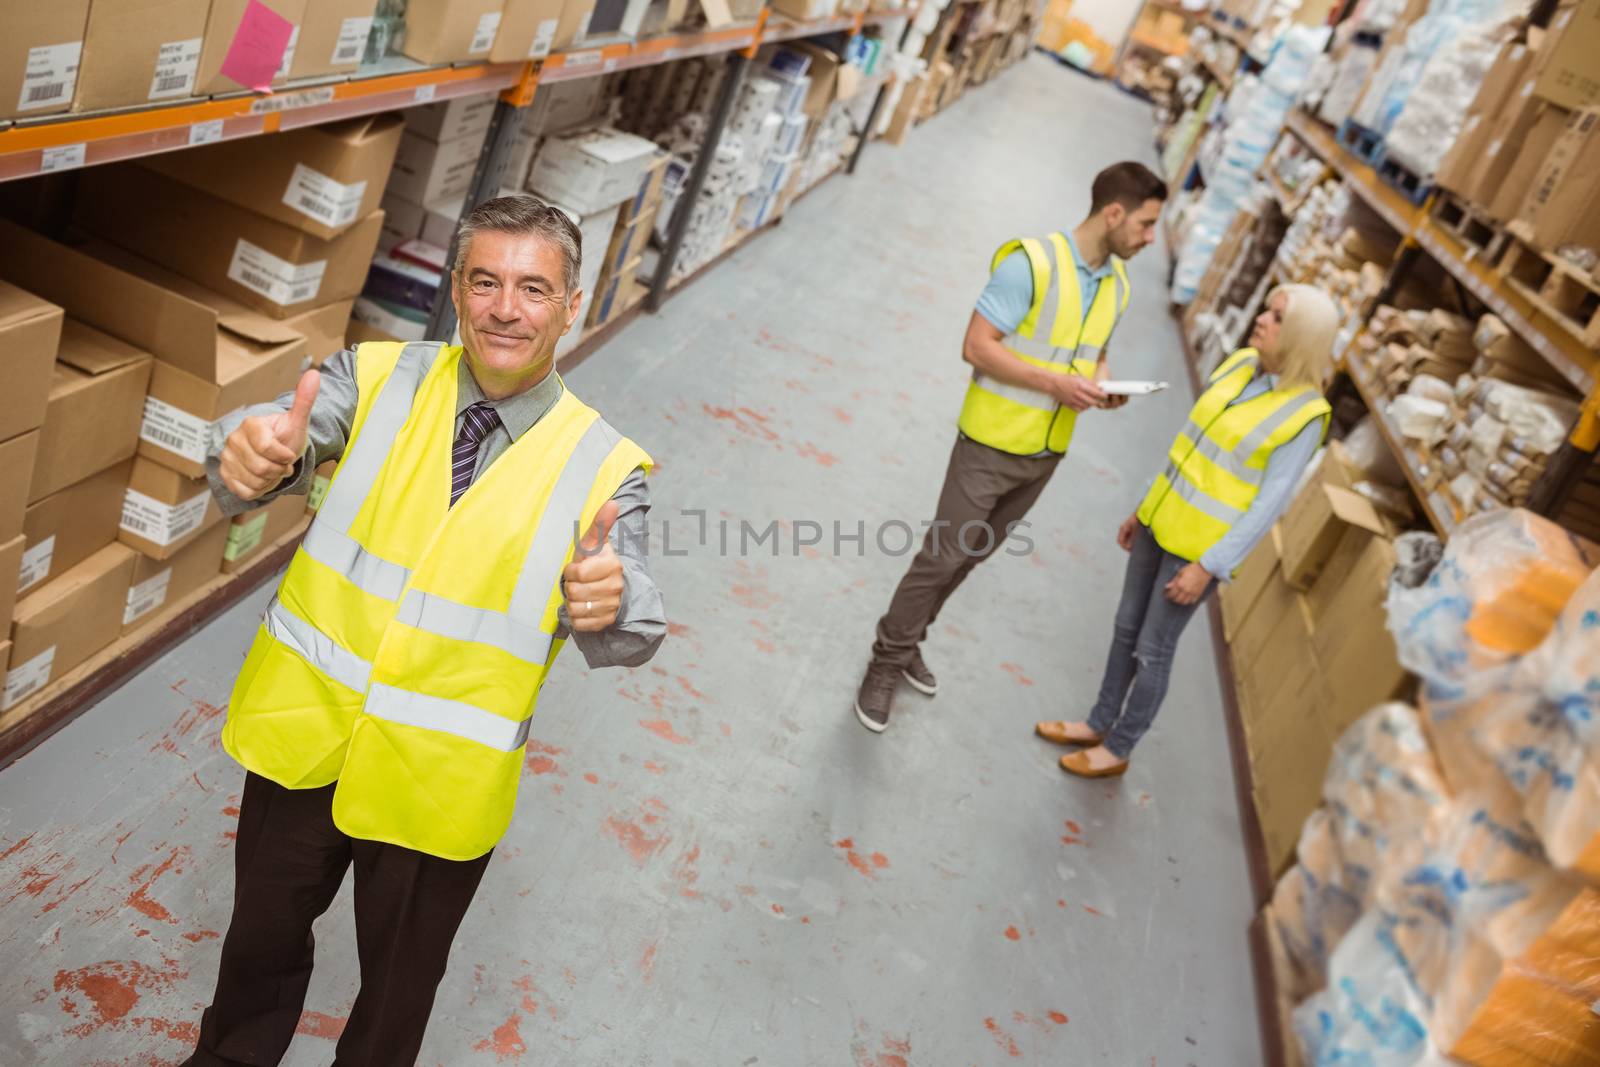 Warehouse manager smiling at camera showing thumbs up in a large warehouse